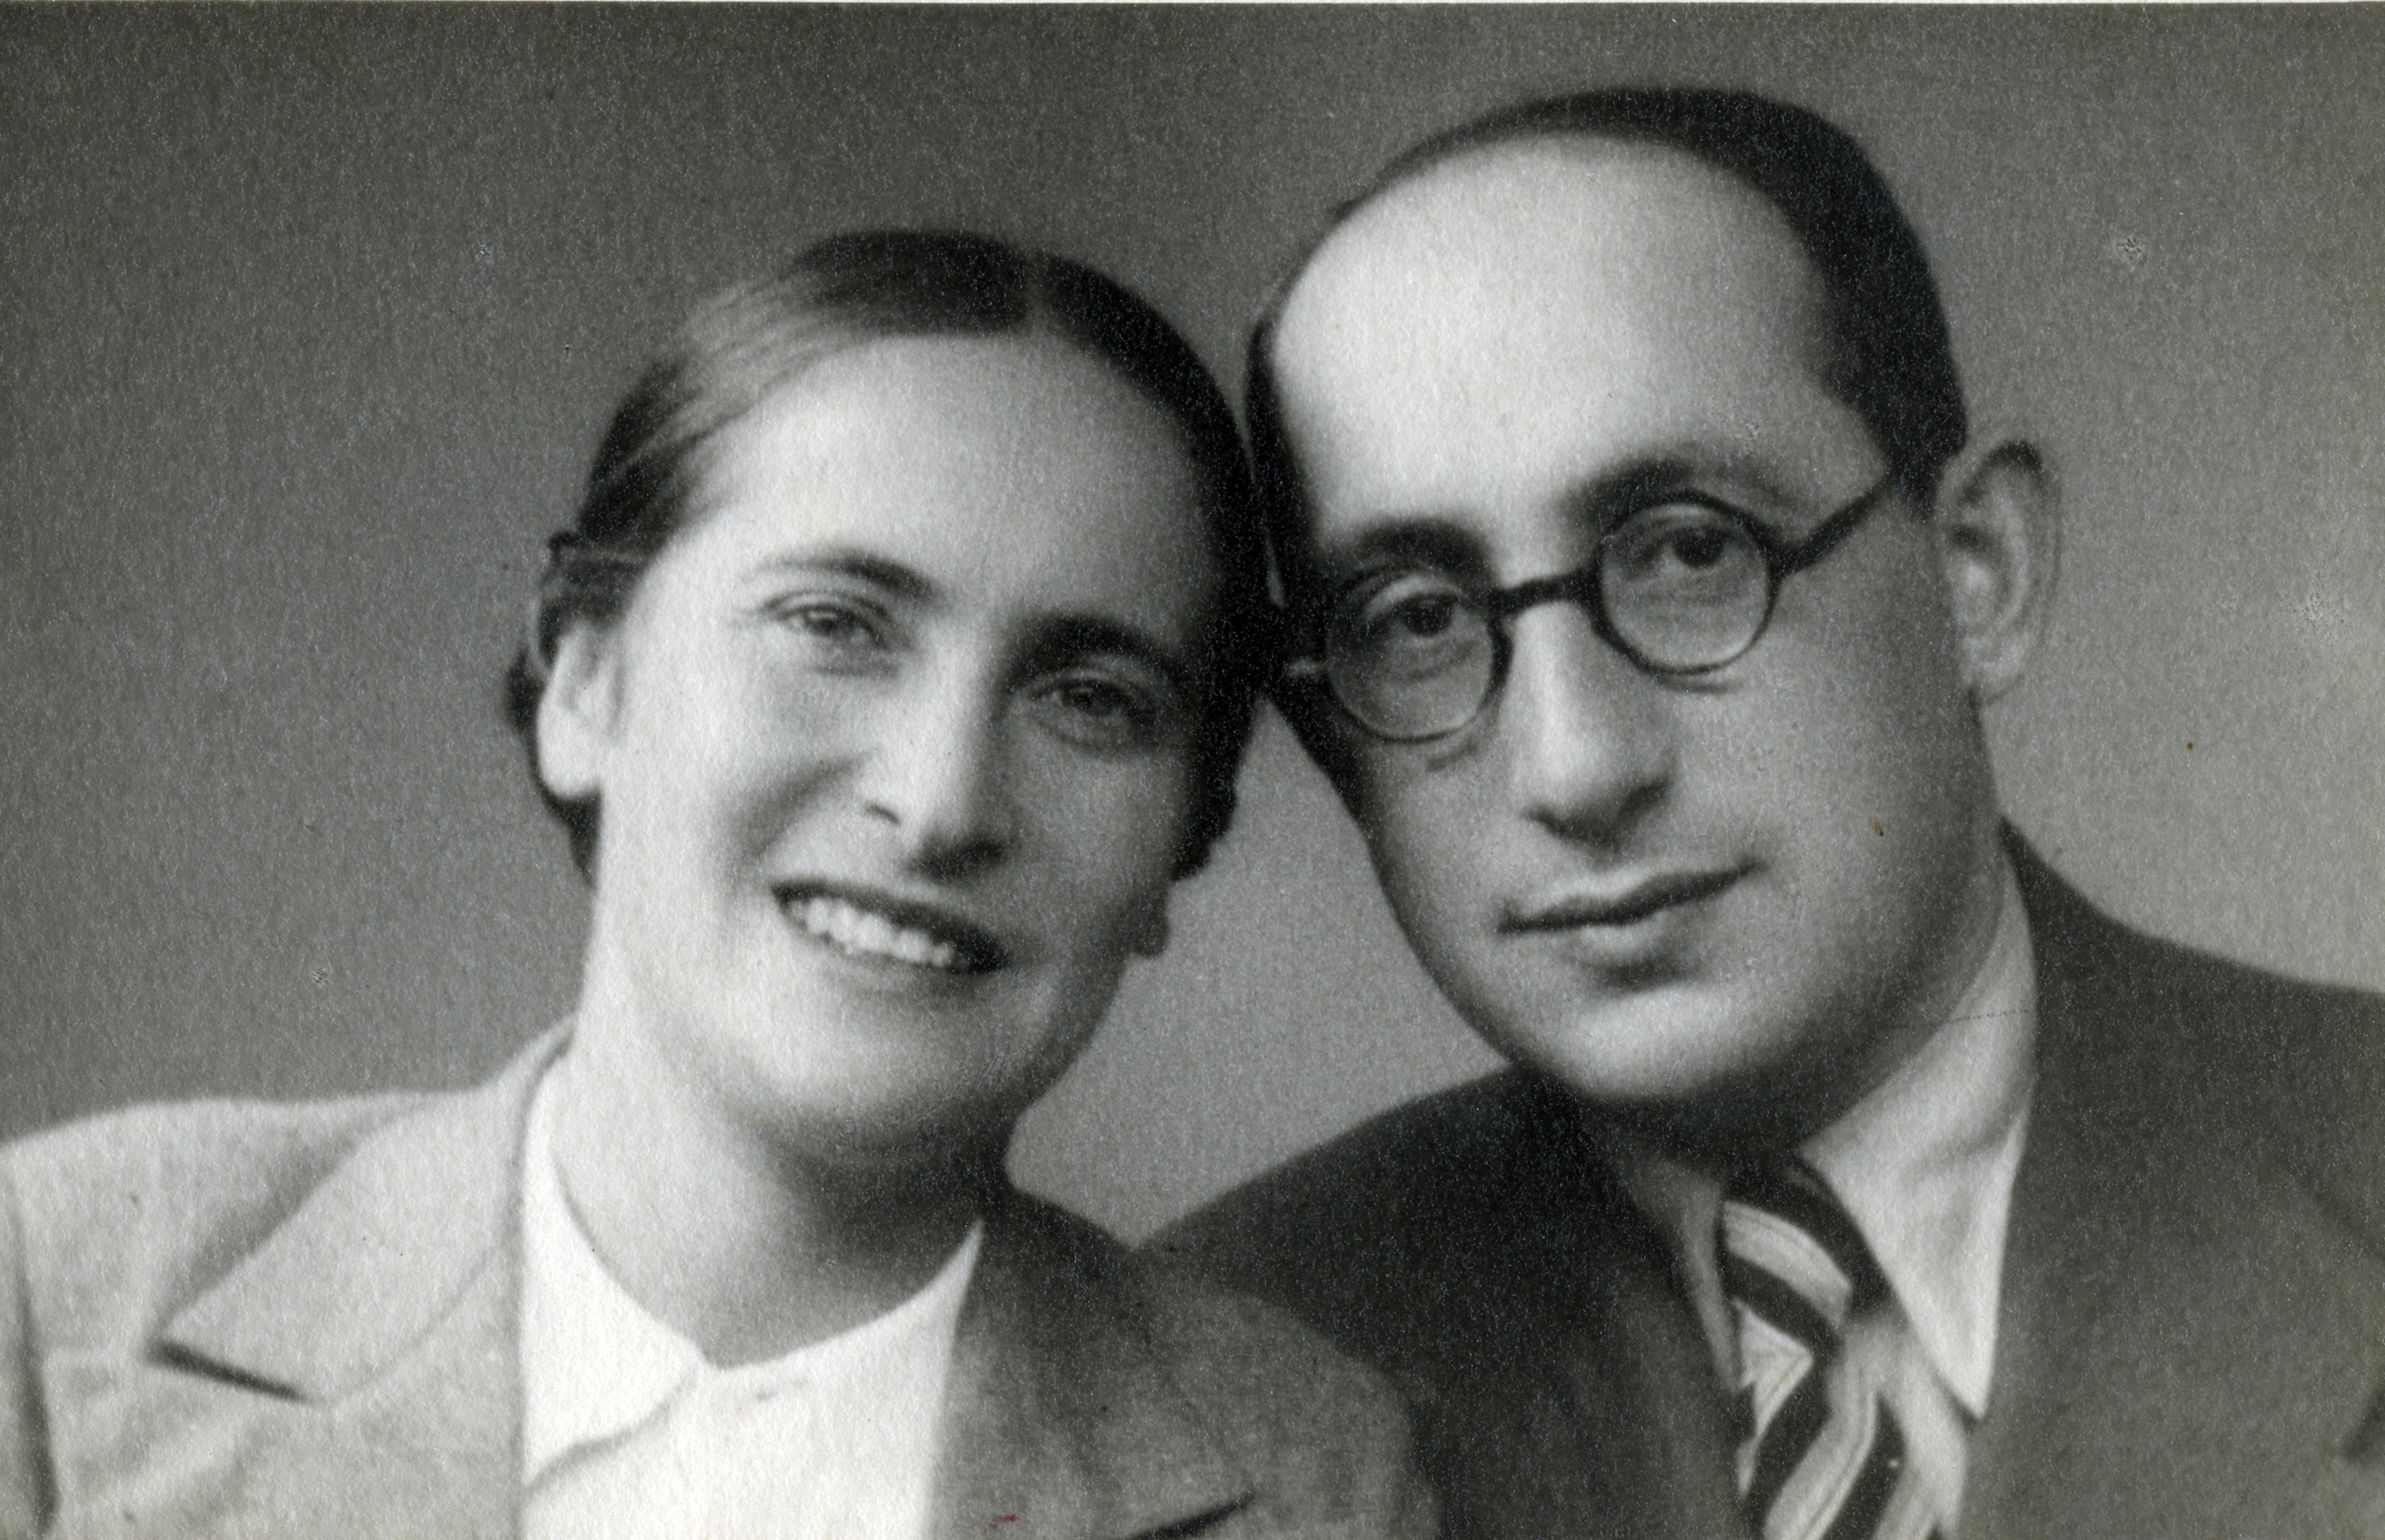 Portrait of Mordechai and Braina Intriligator.

The inscription on the back reads [translated], "Siauliai, 22/11/37.  For my dear brother and sister and little nephew.  Your Braina and Mordechai."